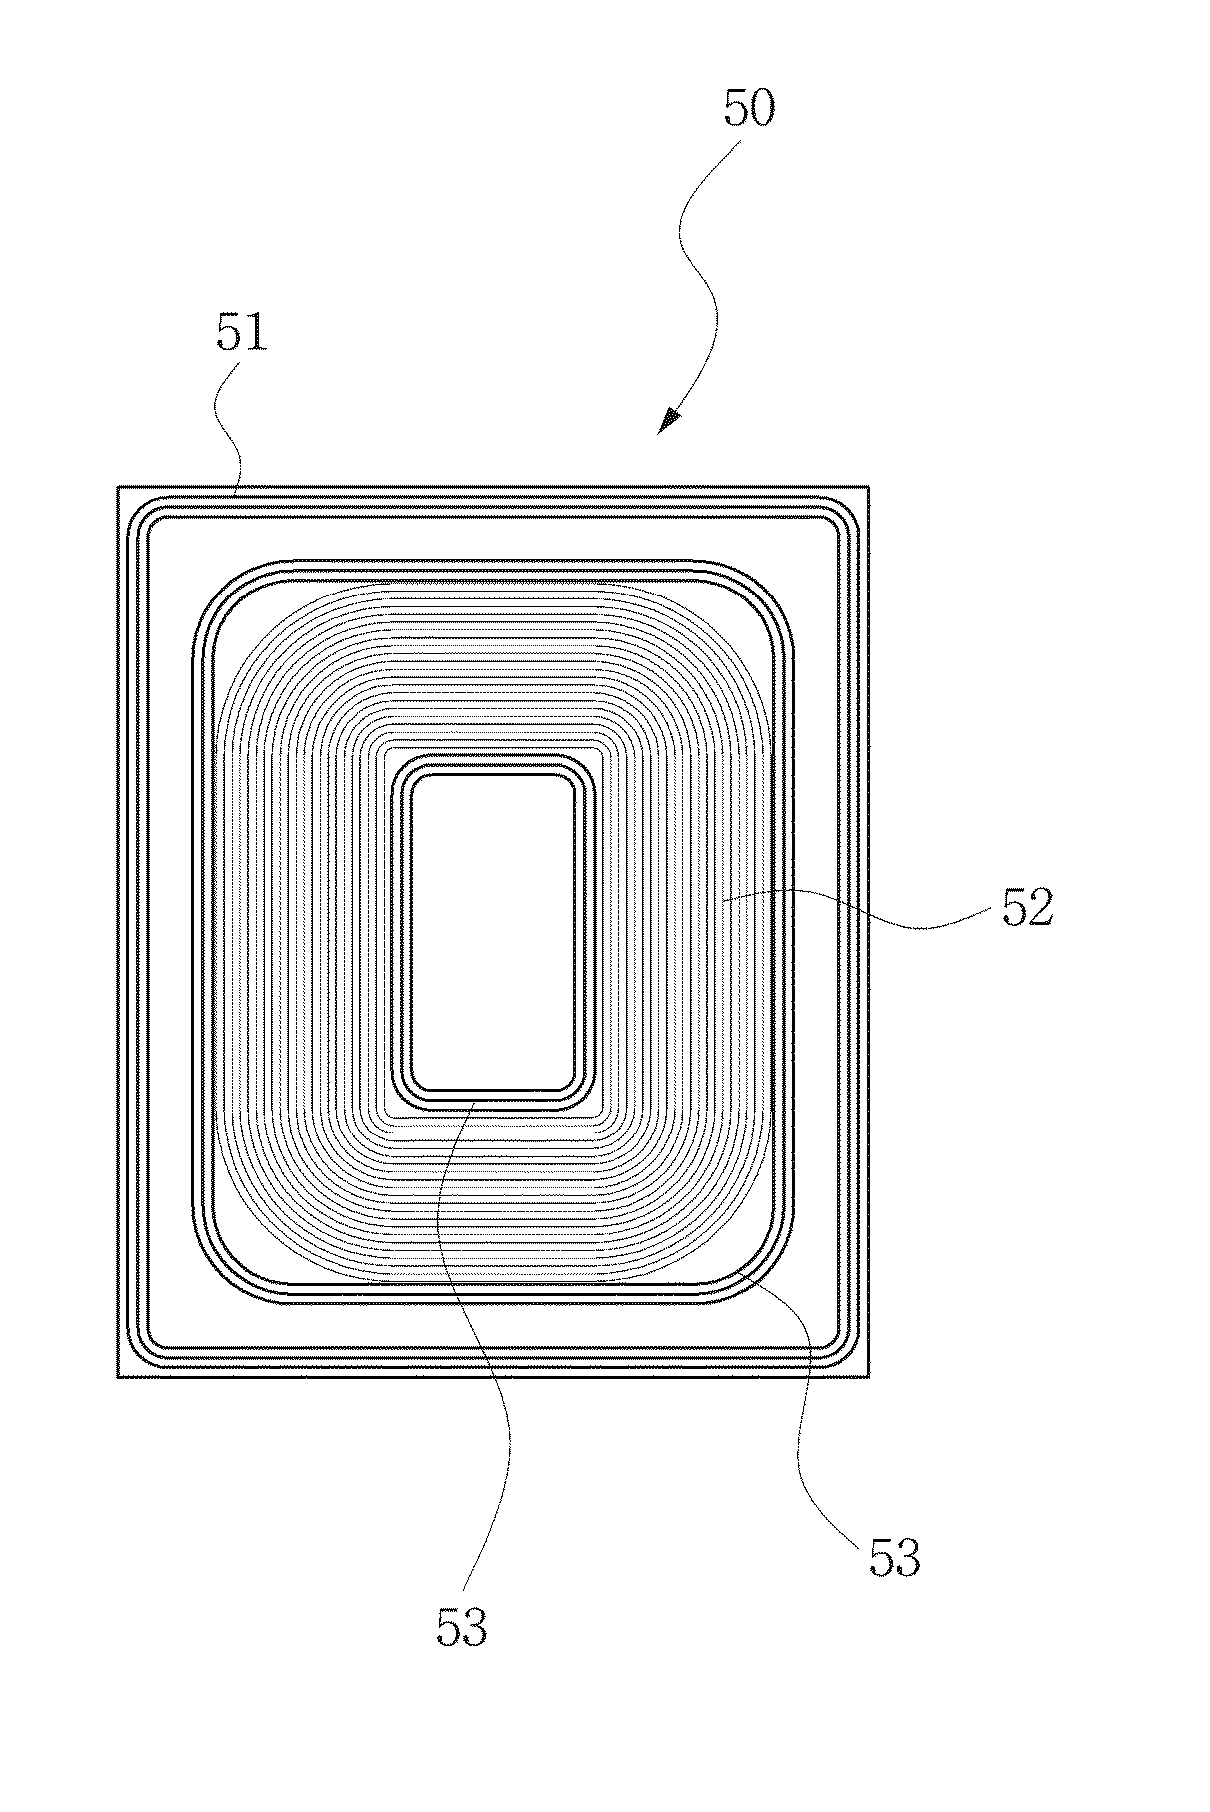 Receiver for wireless charging system